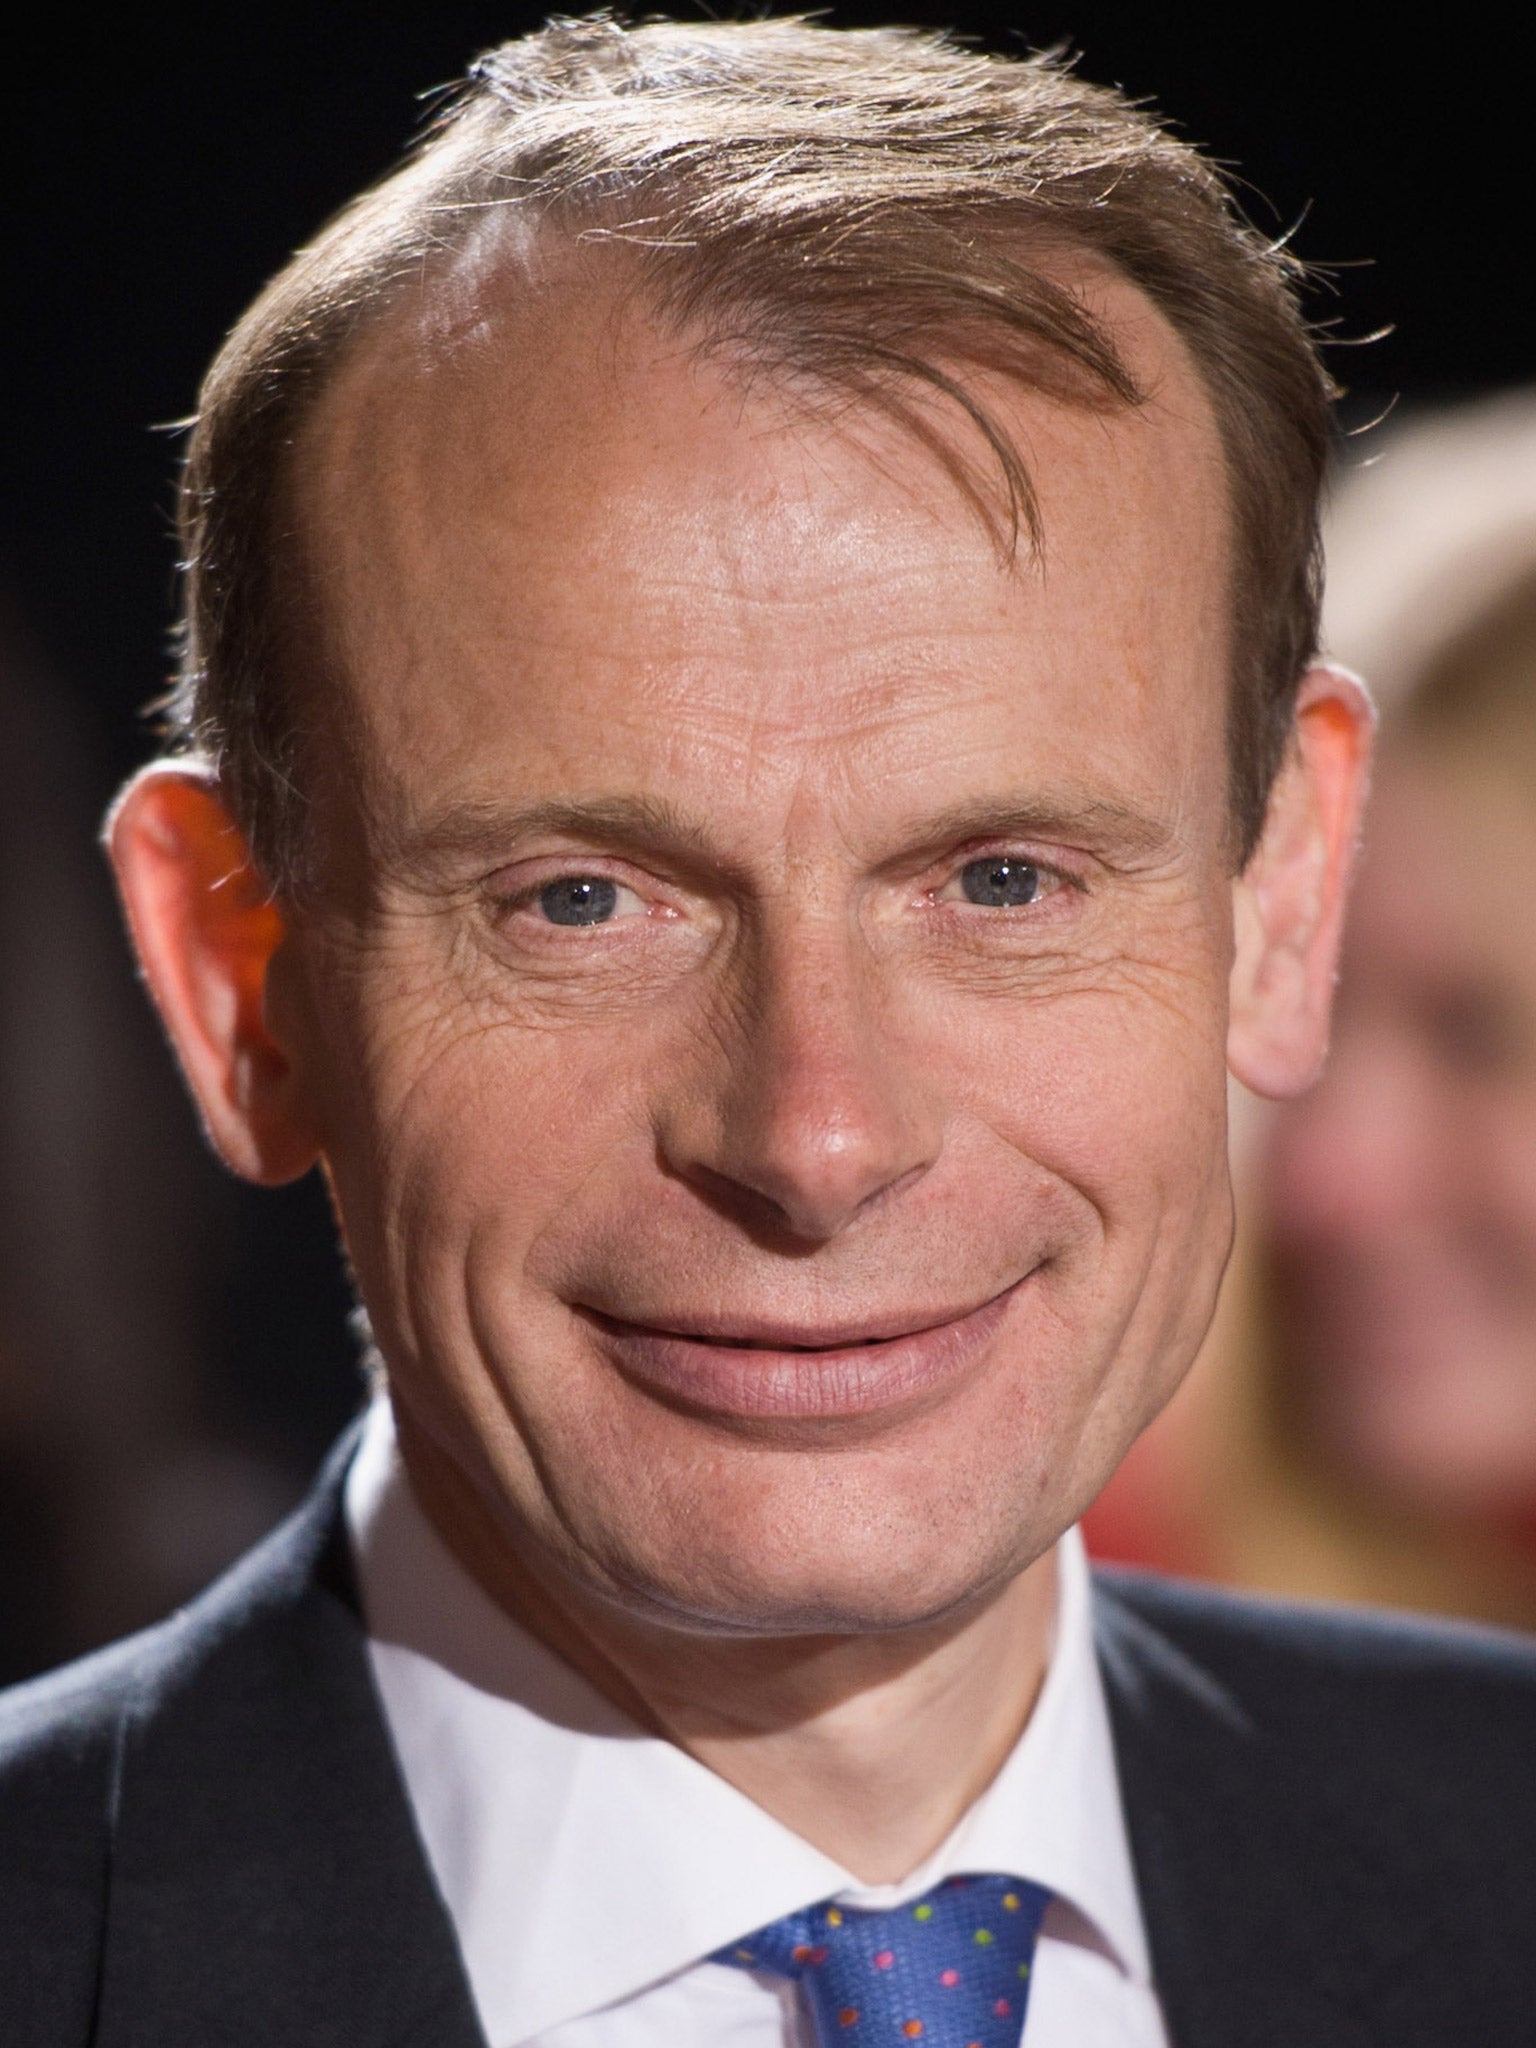 Andrew Marr edited 'The Independent' between 1996 and 1998